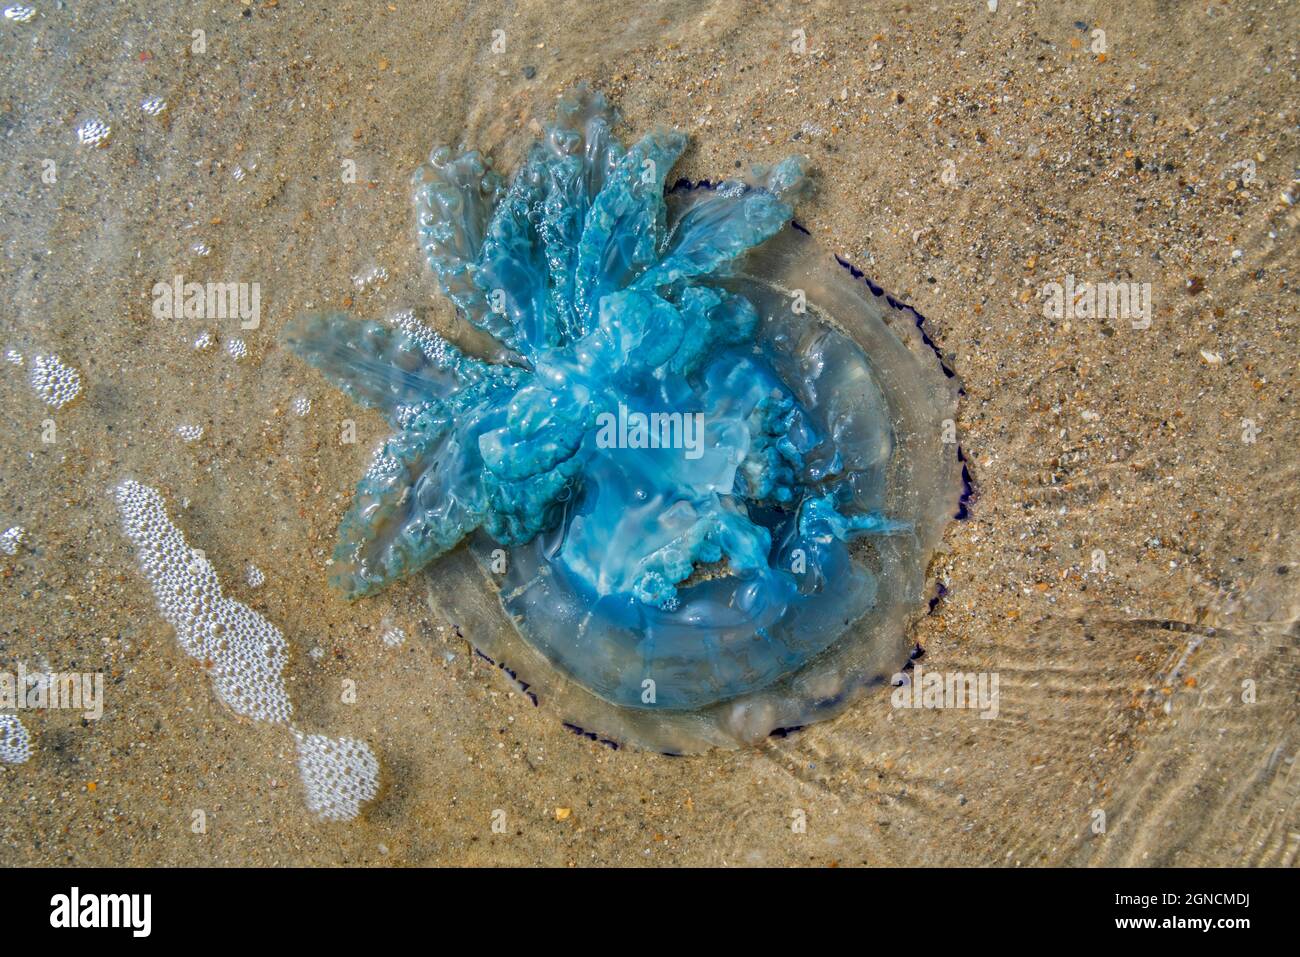 Barrel jellyfish / dustbin-lid jellyfish / frilly-mouthed jellyfish (Rhizostoma pulmo) washed ashore on the beach along the North Sea coast in summer Stock Photo